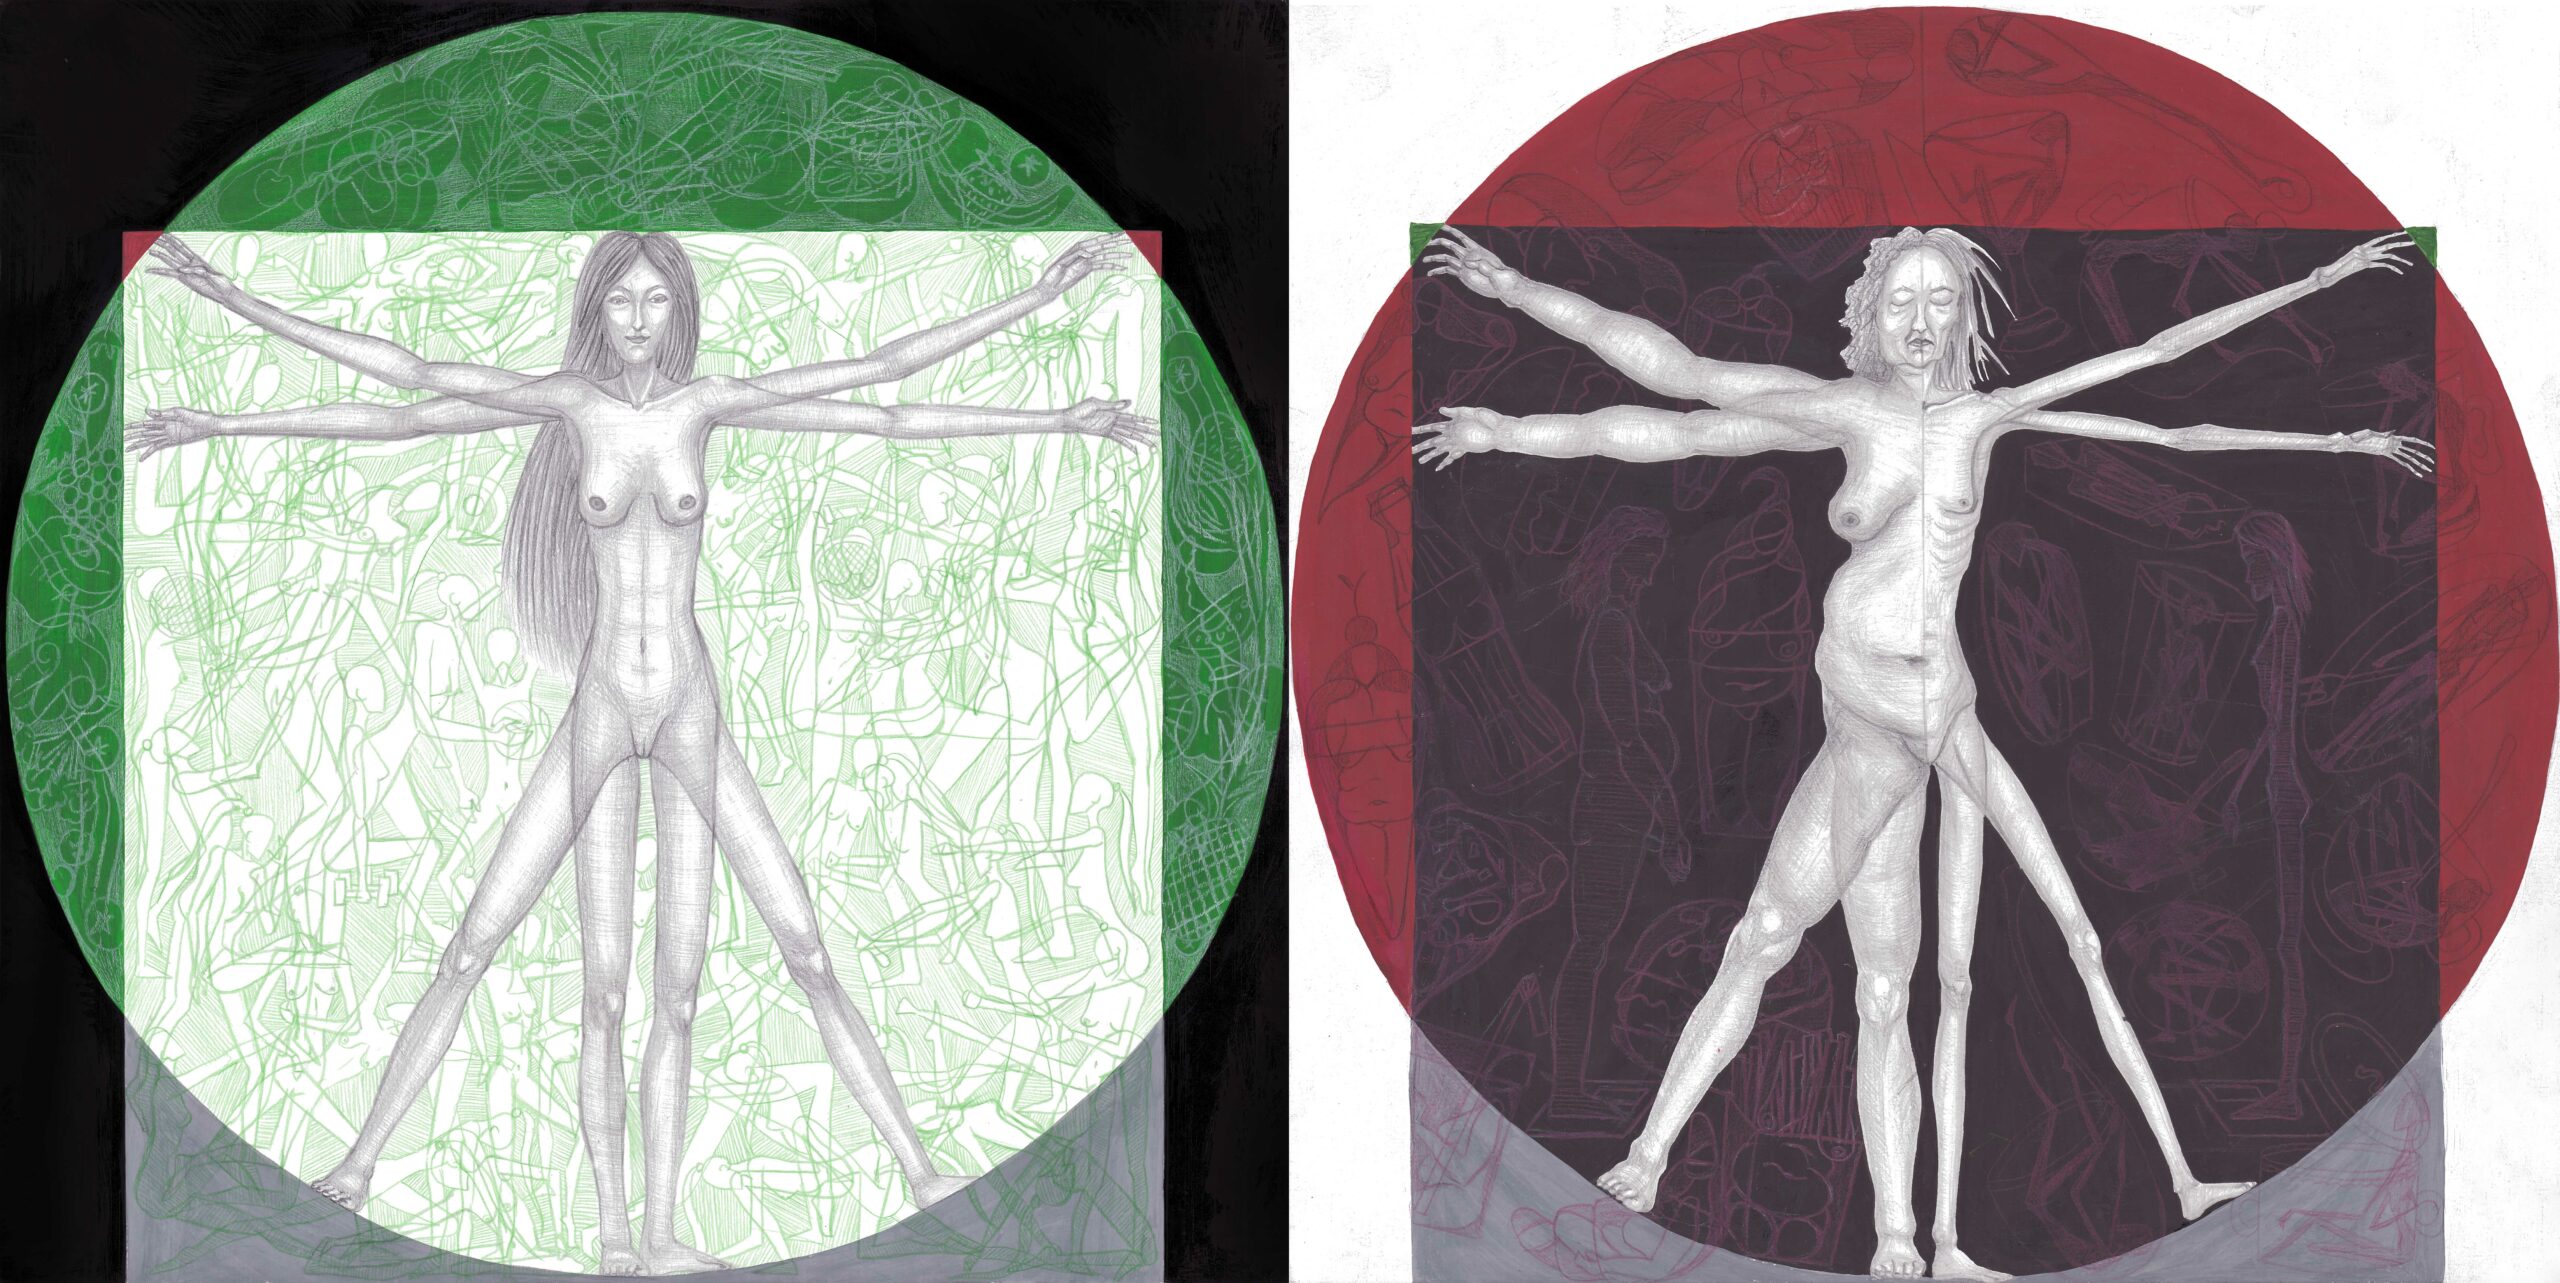 Expectations vs. Reality by Ekaterina Ivanova Dimensions: 38.2 x 38.2 cm; 38.2 x 38.2 cm Medium: Mixed media (pencils, ink, acrylic) Year: 2021 Description: A reference to Da Vinci’s Vitruvian man and its research about the perfect proportions of the human body. It aims to tell about the traps that society sets for the modern woman, imposing insanely high and often unrealistic and unnecessary standards of beauty.